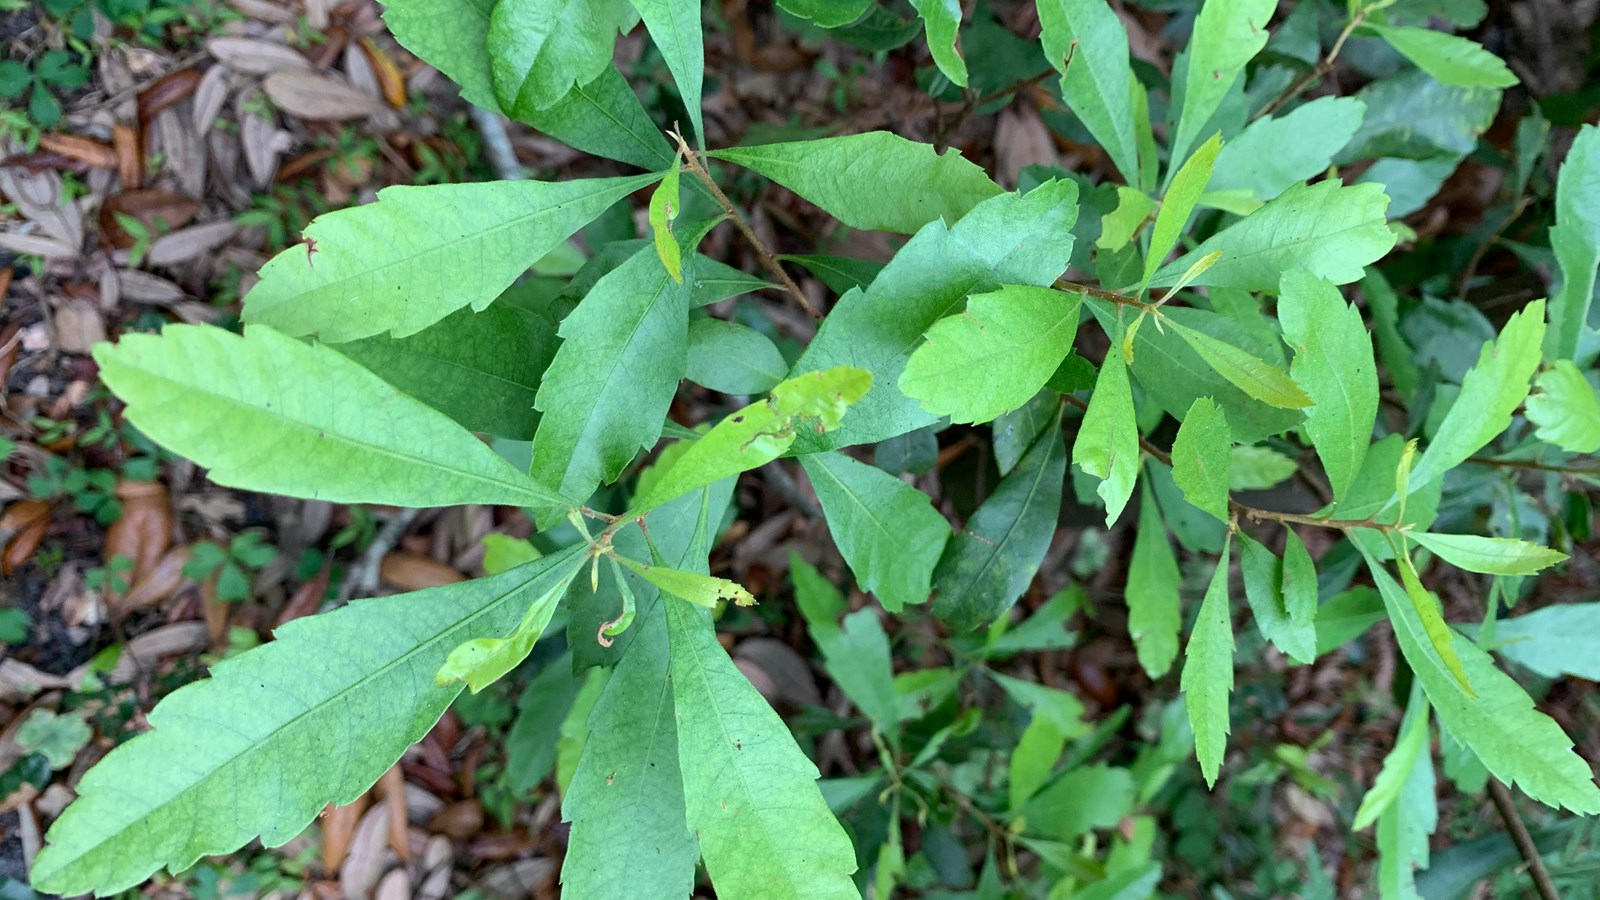 A plant with small, elongated and slightly toothed leaves.